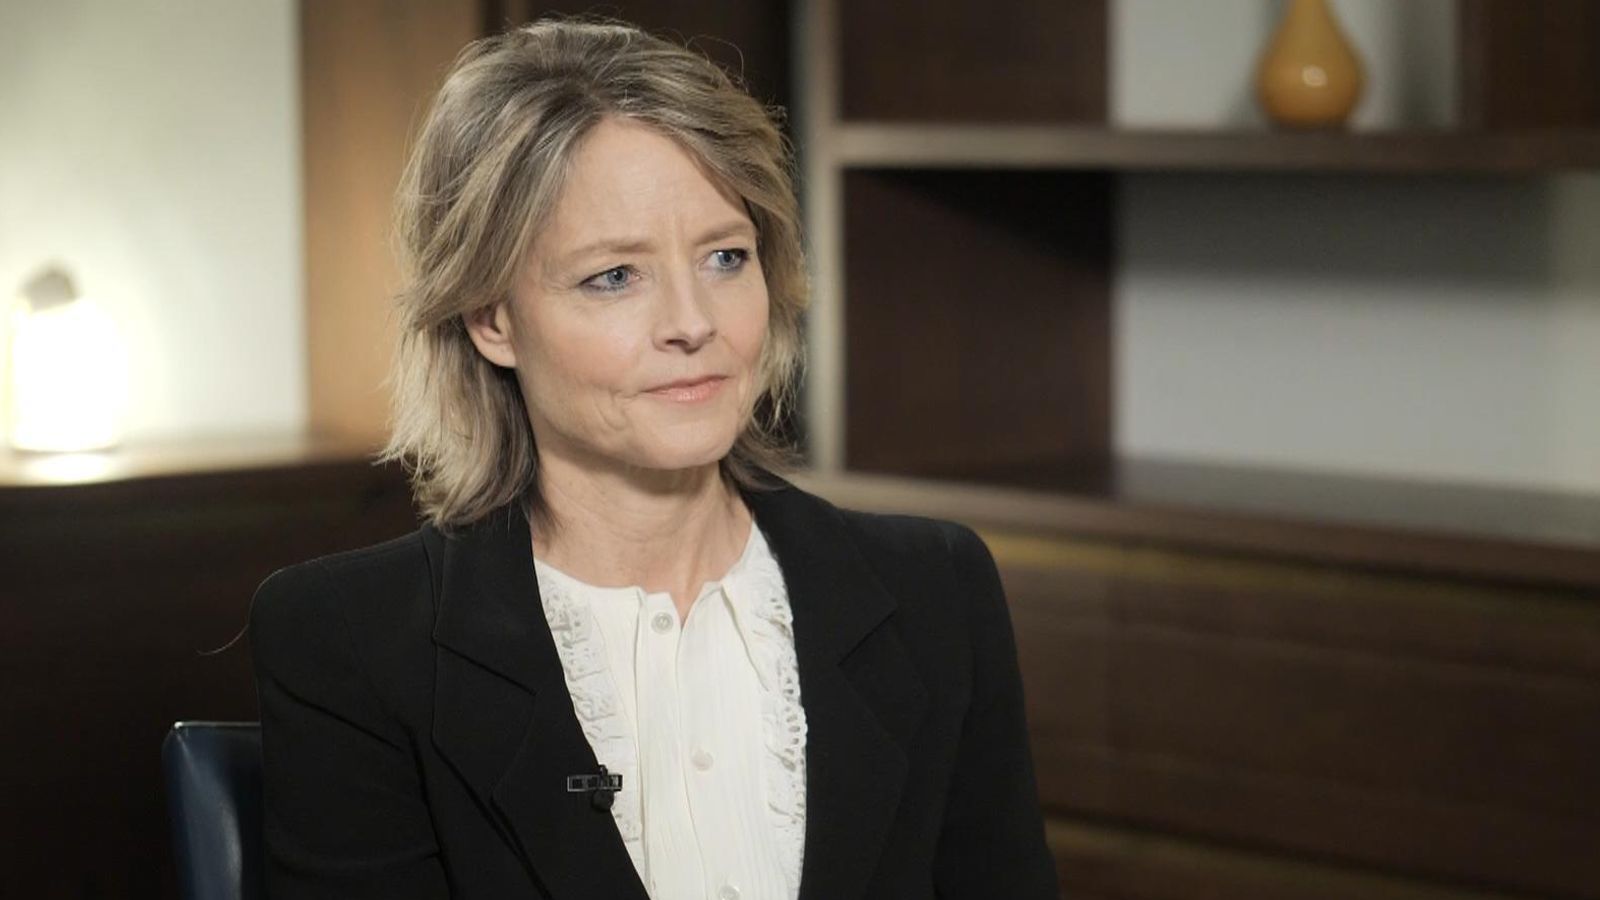 Jodie Foster: Actress reflects on how film industry has changed